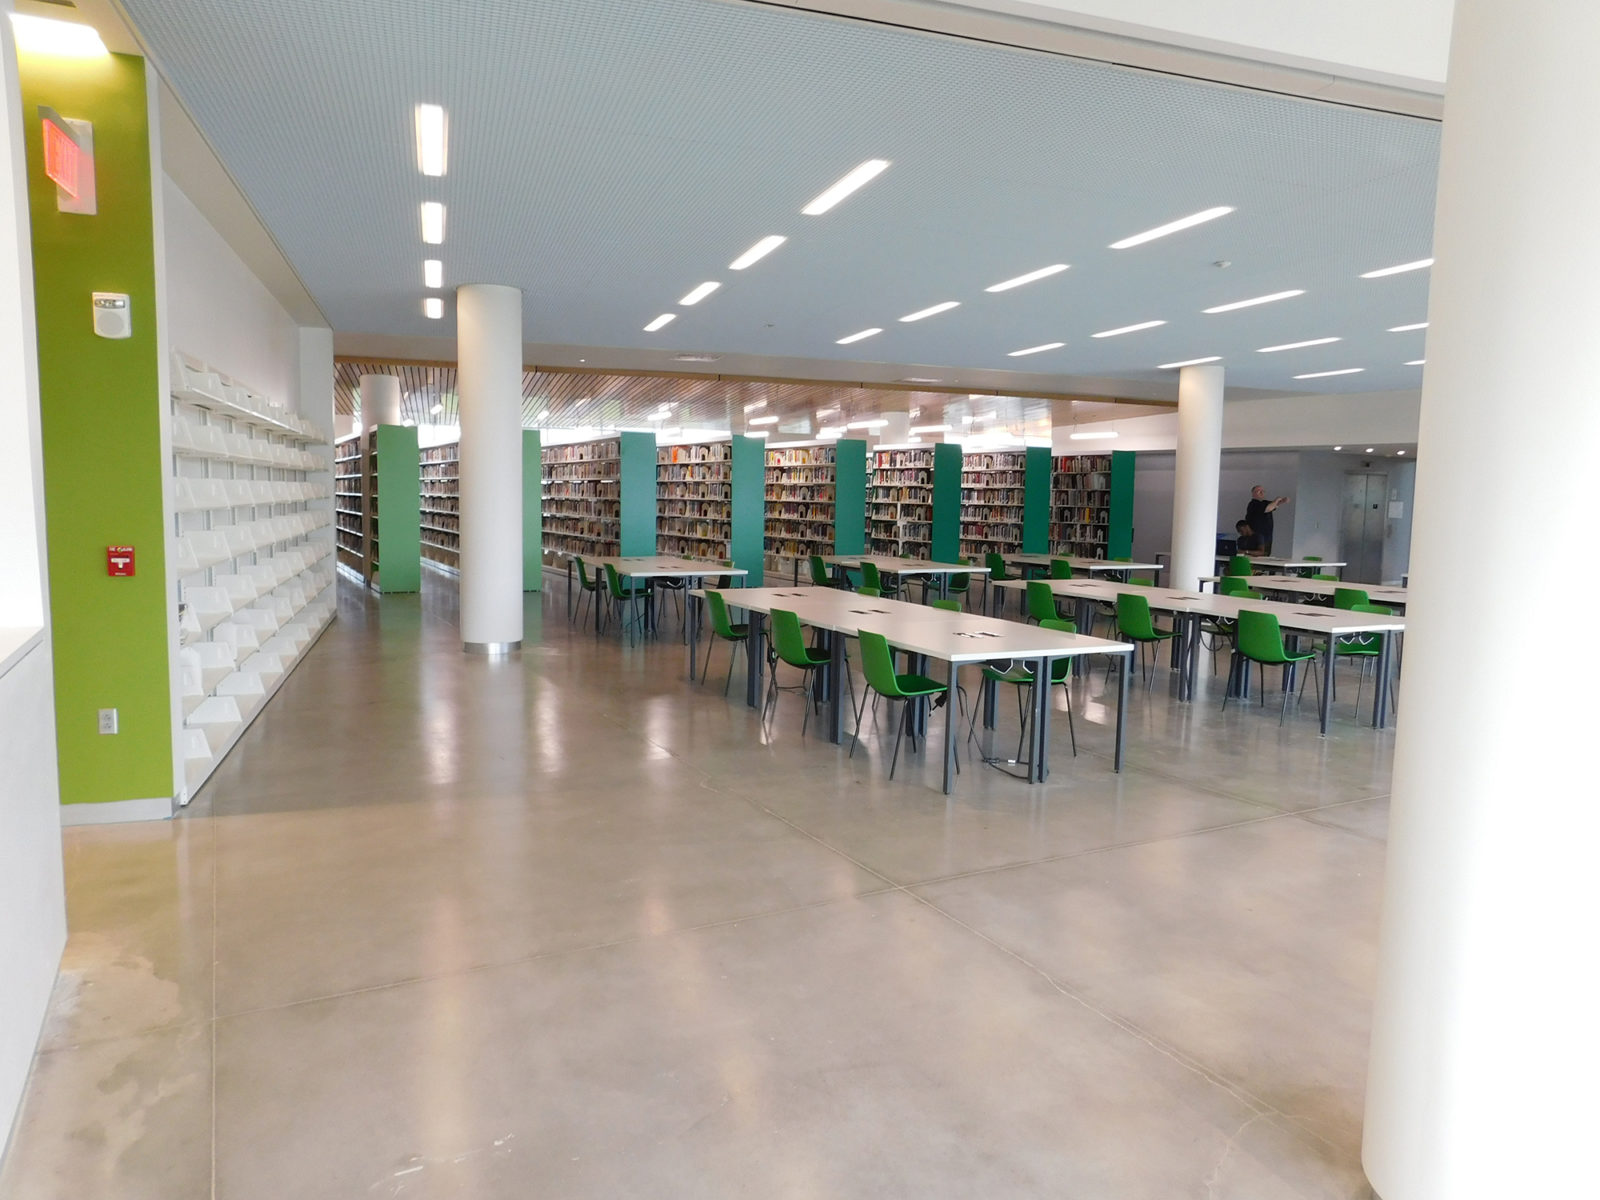 View of the Temple library bookshelves and some collaborative tables and chairs. Bookshelf ends are painted in different shades of green.